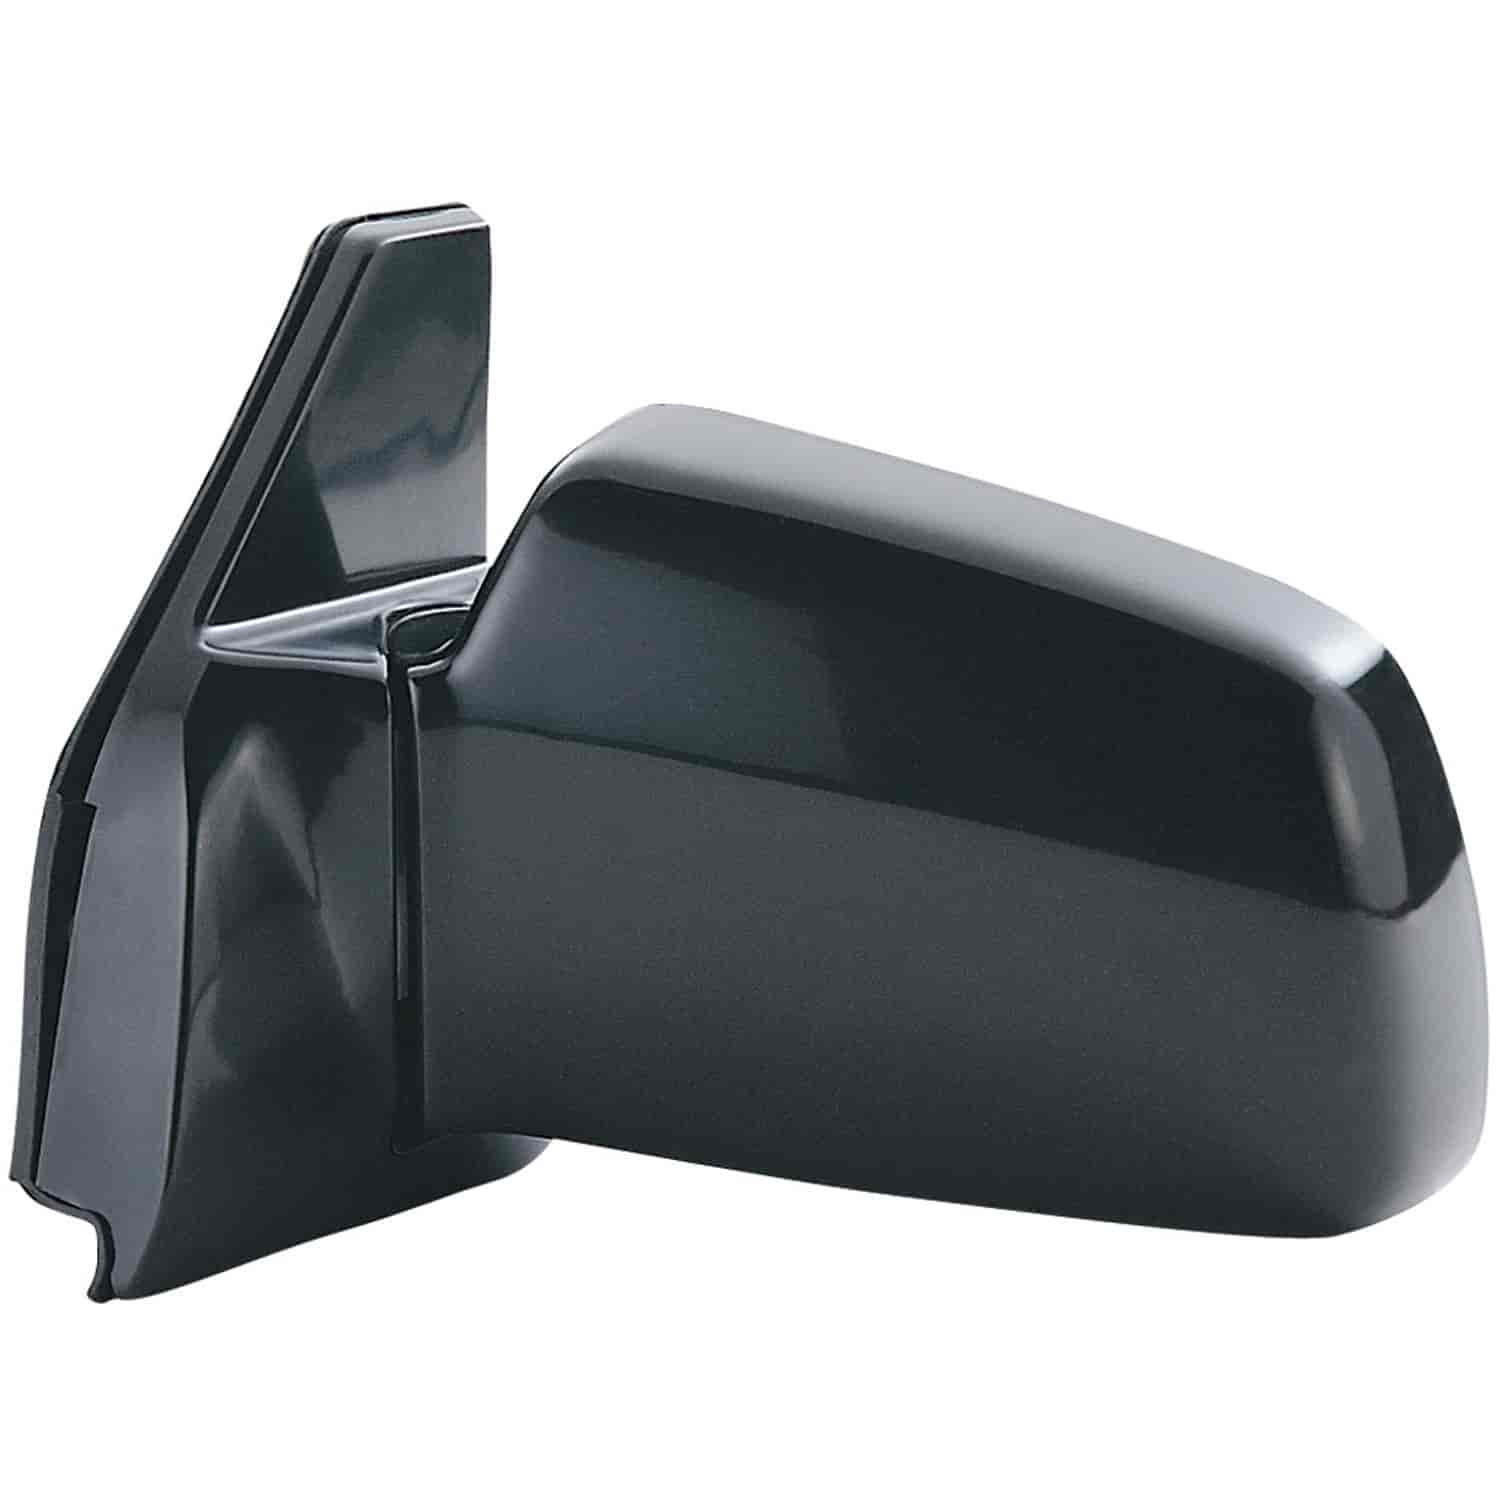 OEM Style Replacement mirror for 89-98 Suzuki kick 2 door driver side mirror tested to fit and funct